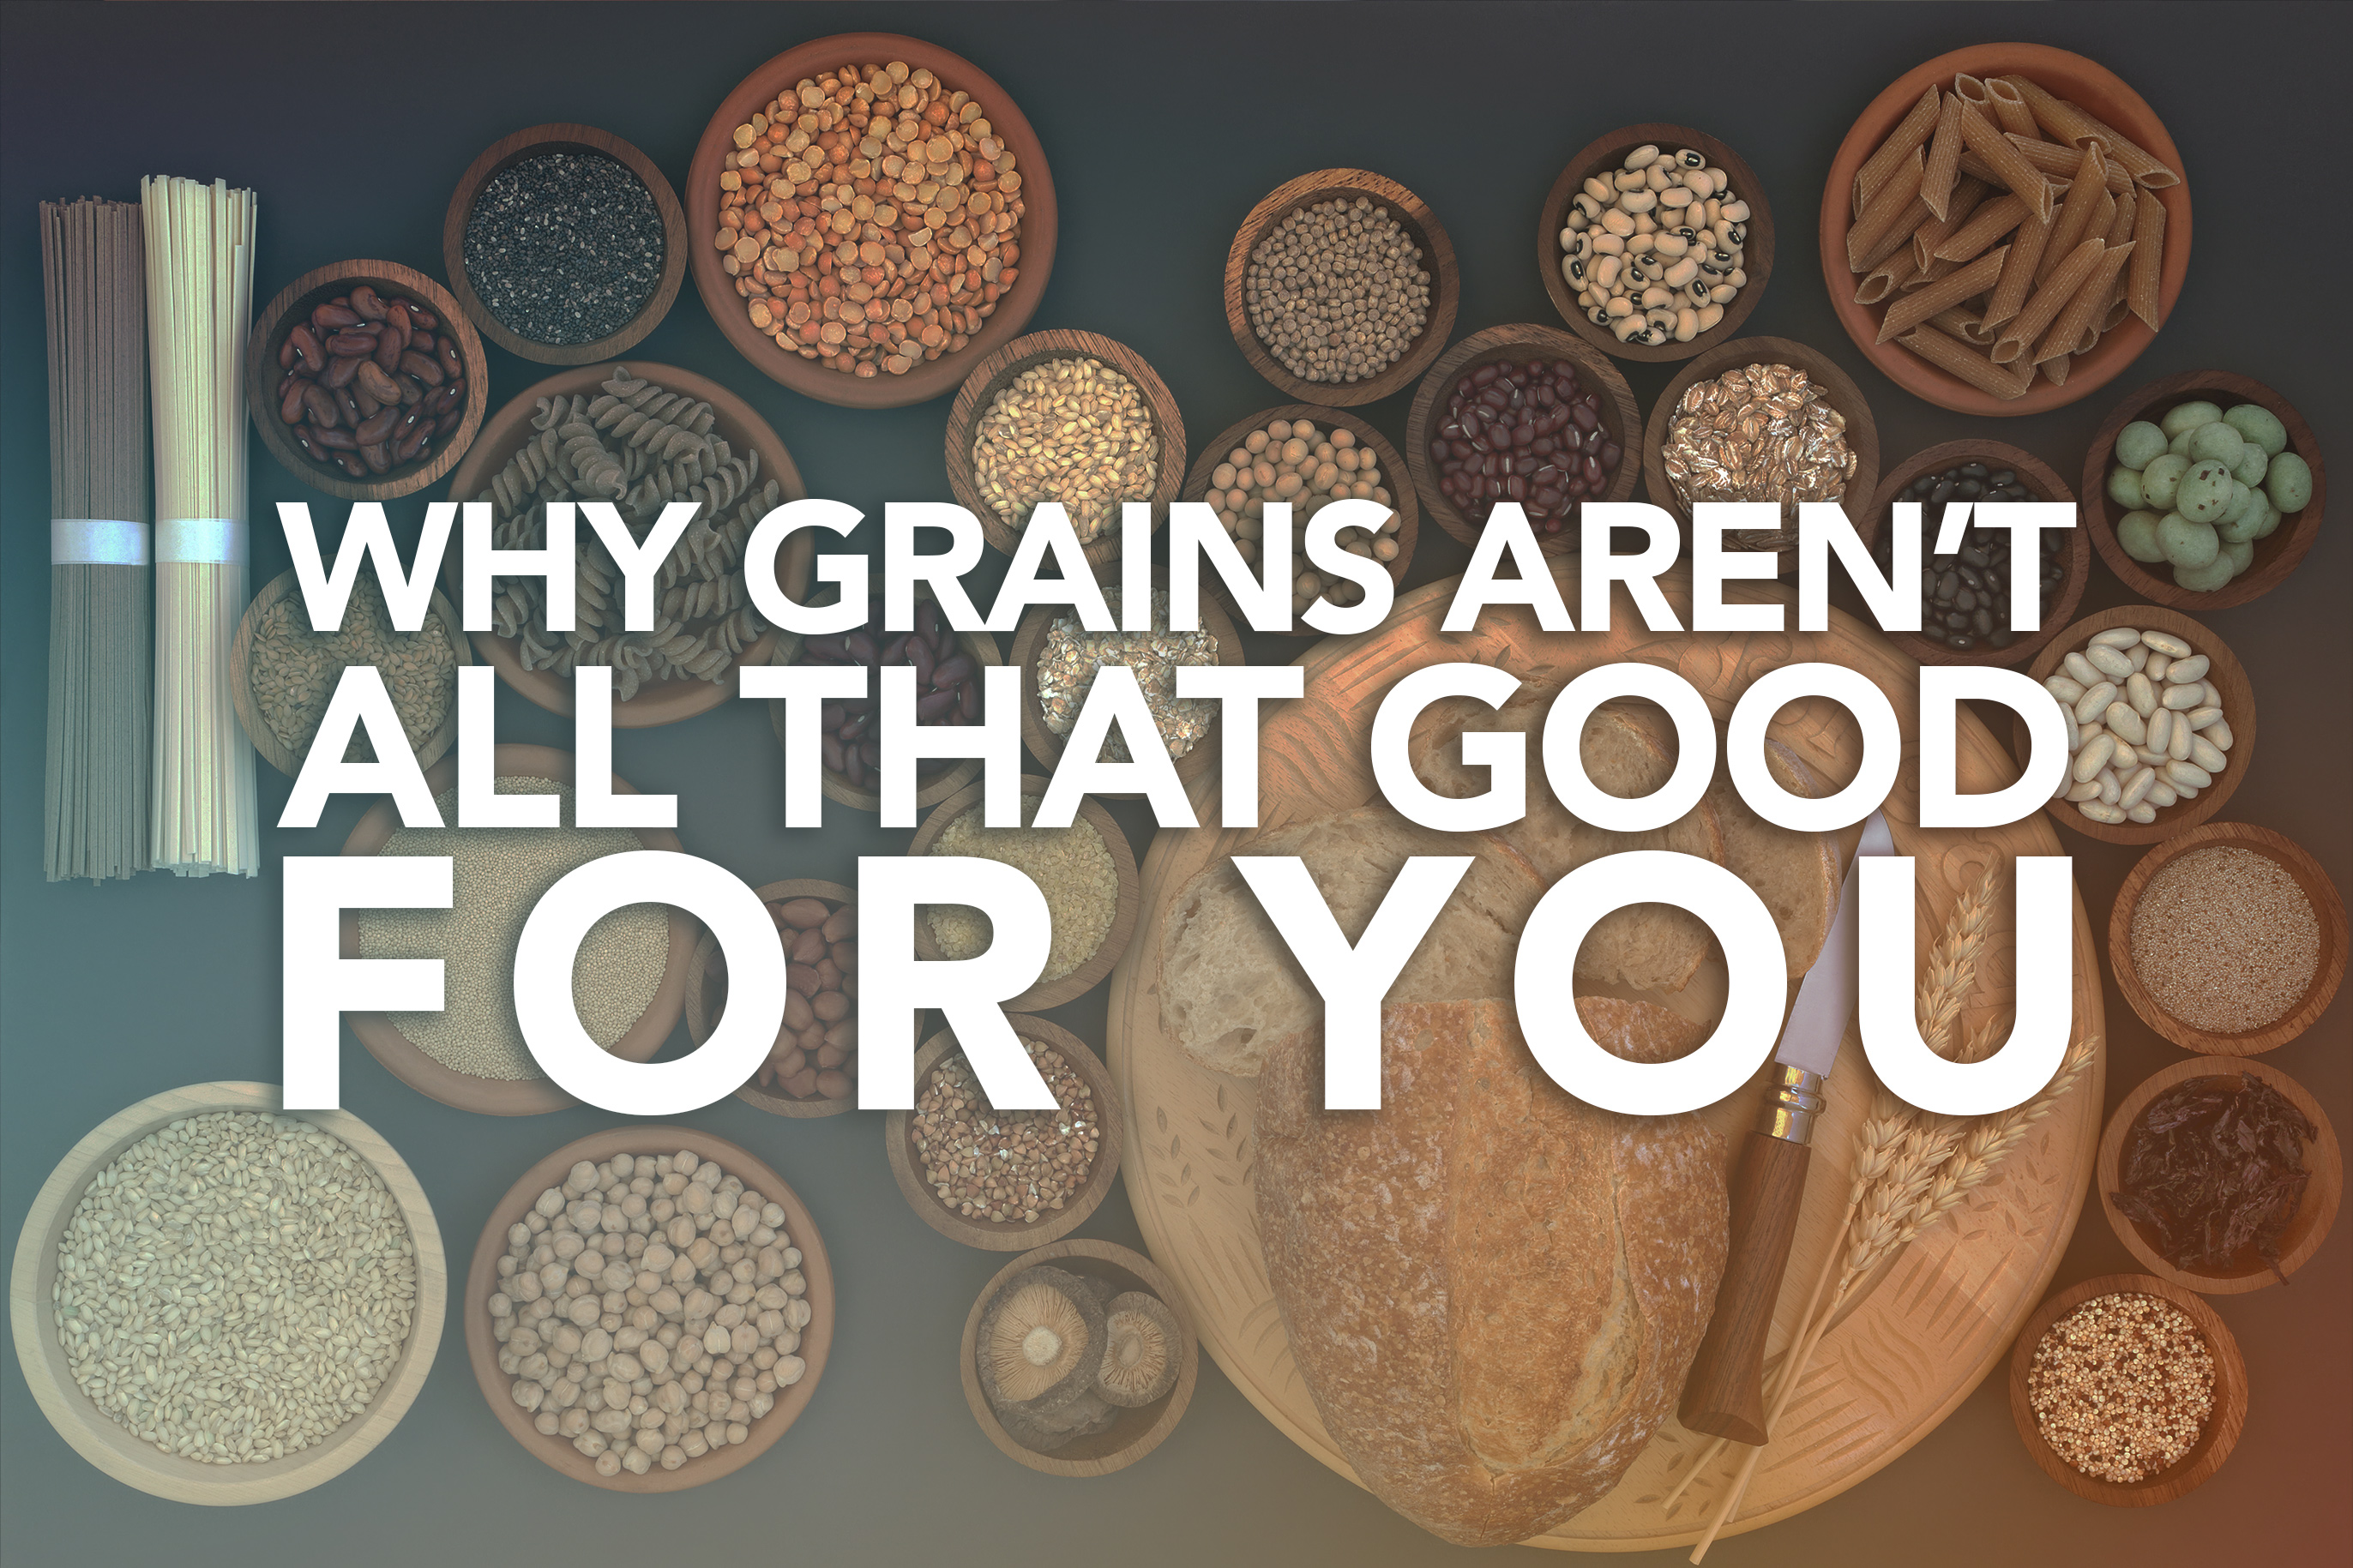 Why Grains Aren’t All That Good for You